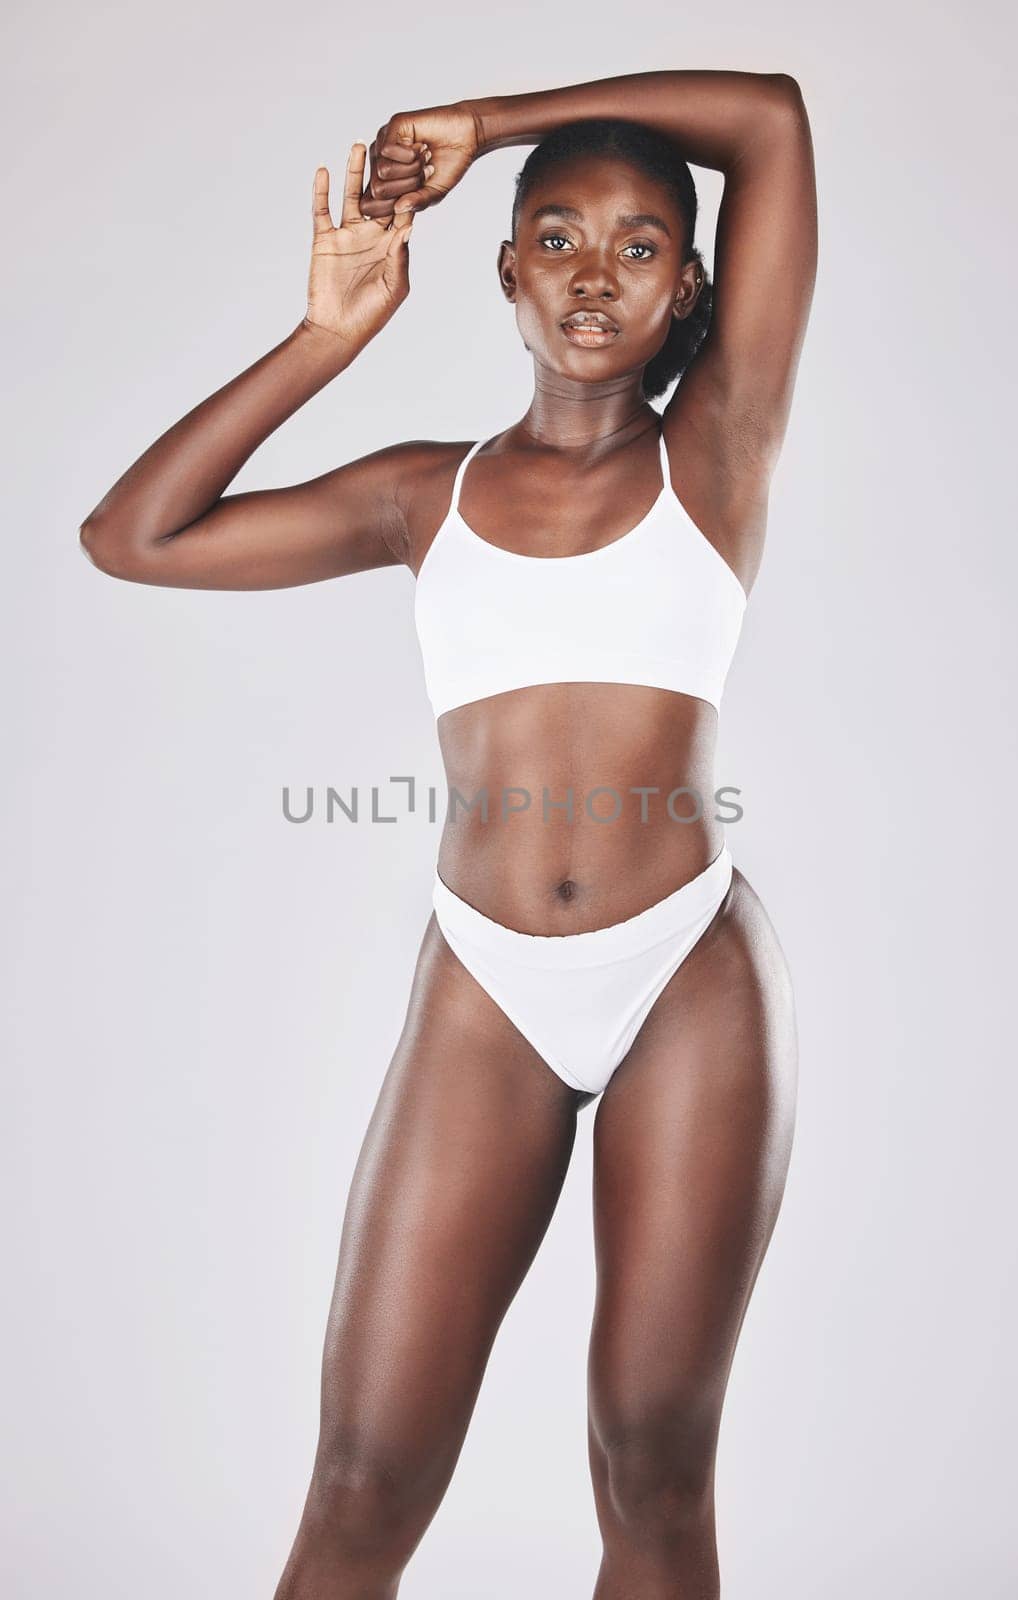 Black woman, body and diet for health, wellness and to lose weight for fitness and a healthy lifestyle and mindset. Portrait of aesthetic african, model in studio with a slim stomach after exercise.